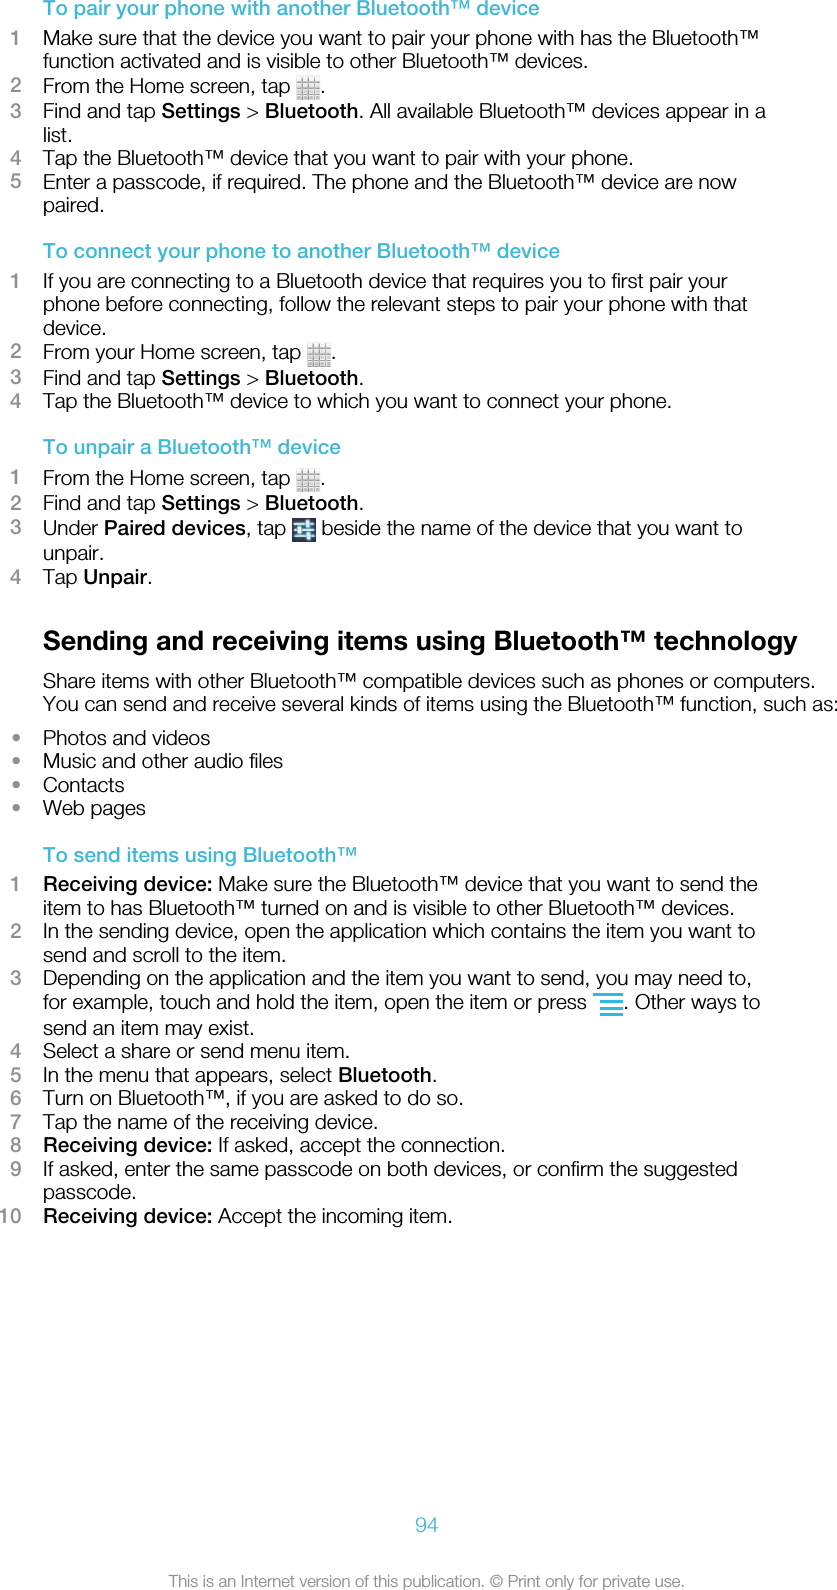 To pair your phone with another Bluetooth™ device1Make sure that the device you want to pair your phone with has the Bluetooth™function activated and is visible to other Bluetooth™ devices.2From the Home screen, tap  .3Find and tap Settings &gt; Bluetooth. All available Bluetooth™ devices appear in alist.4Tap the Bluetooth™ device that you want to pair with your phone.5Enter a passcode, if required. The phone and the Bluetooth™ device are nowpaired.To connect your phone to another Bluetooth™ device1If you are connecting to a Bluetooth device that requires you to first pair yourphone before connecting, follow the relevant steps to pair your phone with thatdevice.2From your Home screen, tap  .3Find and tap Settings &gt; Bluetooth.4Tap the Bluetooth™ device to which you want to connect your phone.To unpair a Bluetooth™ device1From the Home screen, tap  .2Find and tap Settings &gt; Bluetooth.3Under Paired devices, tap   beside the name of the device that you want tounpair.4Tap Unpair.Sending and receiving items using Bluetooth™ technologyShare items with other Bluetooth™ compatible devices such as phones or computers.You can send and receive several kinds of items using the Bluetooth™ function, such as:•Photos and videos•Music and other audio files•Contacts•Web pagesTo send items using Bluetooth™1Receiving device: Make sure the Bluetooth™ device that you want to send theitem to has Bluetooth™ turned on and is visible to other Bluetooth™ devices.2In the sending device, open the application which contains the item you want tosend and scroll to the item.3Depending on the application and the item you want to send, you may need to,for example, touch and hold the item, open the item or press  . Other ways tosend an item may exist.4Select a share or send menu item.5In the menu that appears, select Bluetooth.6Turn on Bluetooth™, if you are asked to do so.7Tap the name of the receiving device.8Receiving device: If asked, accept the connection.9If asked, enter the same passcode on both devices, or confirm the suggestedpasscode.10 Receiving device: Accept the incoming item.94This is an Internet version of this publication. © Print only for private use.